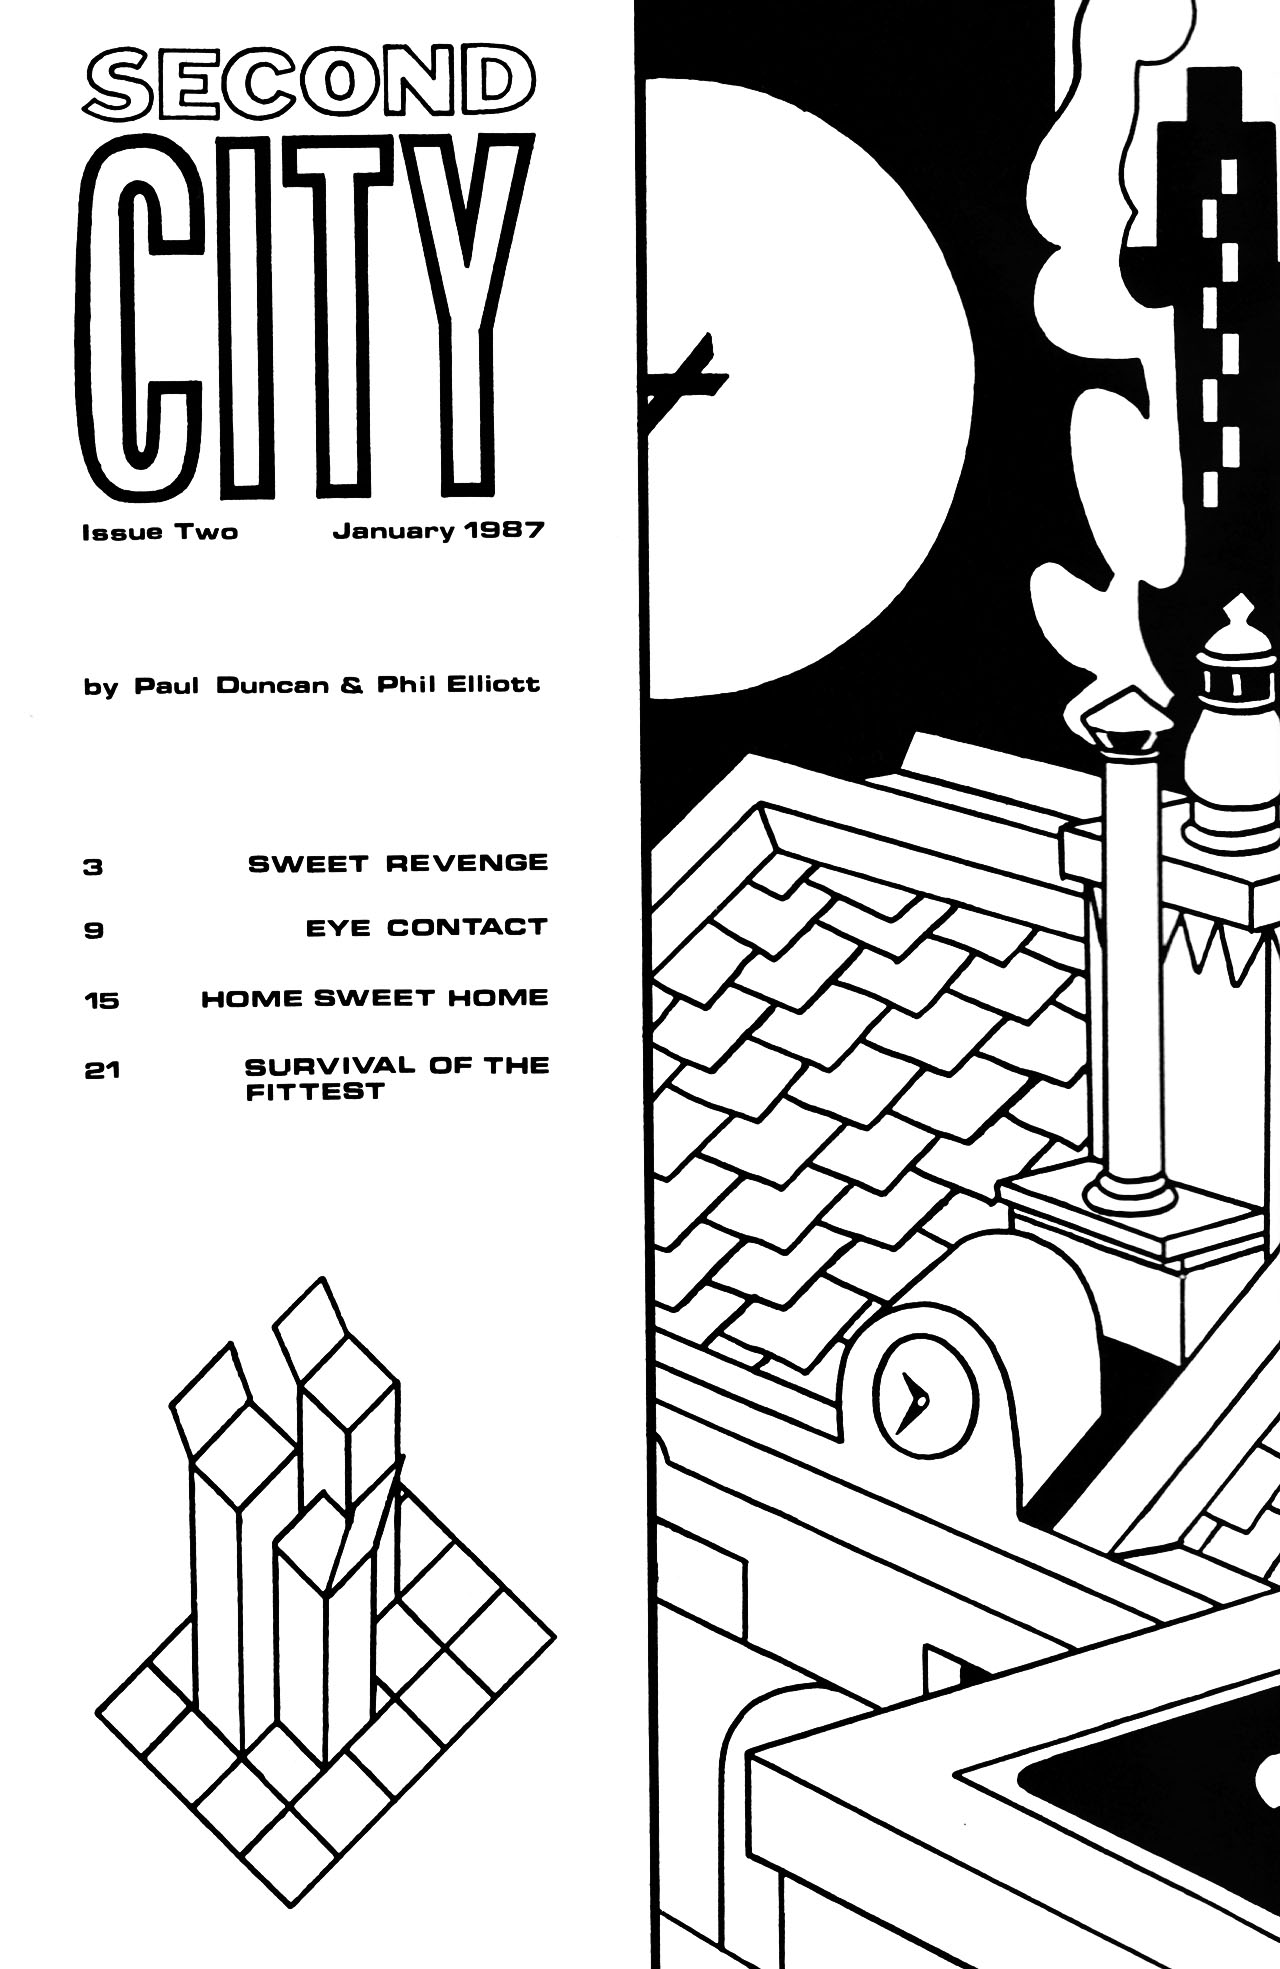 Read online Second City comic -  Issue #2 - 2